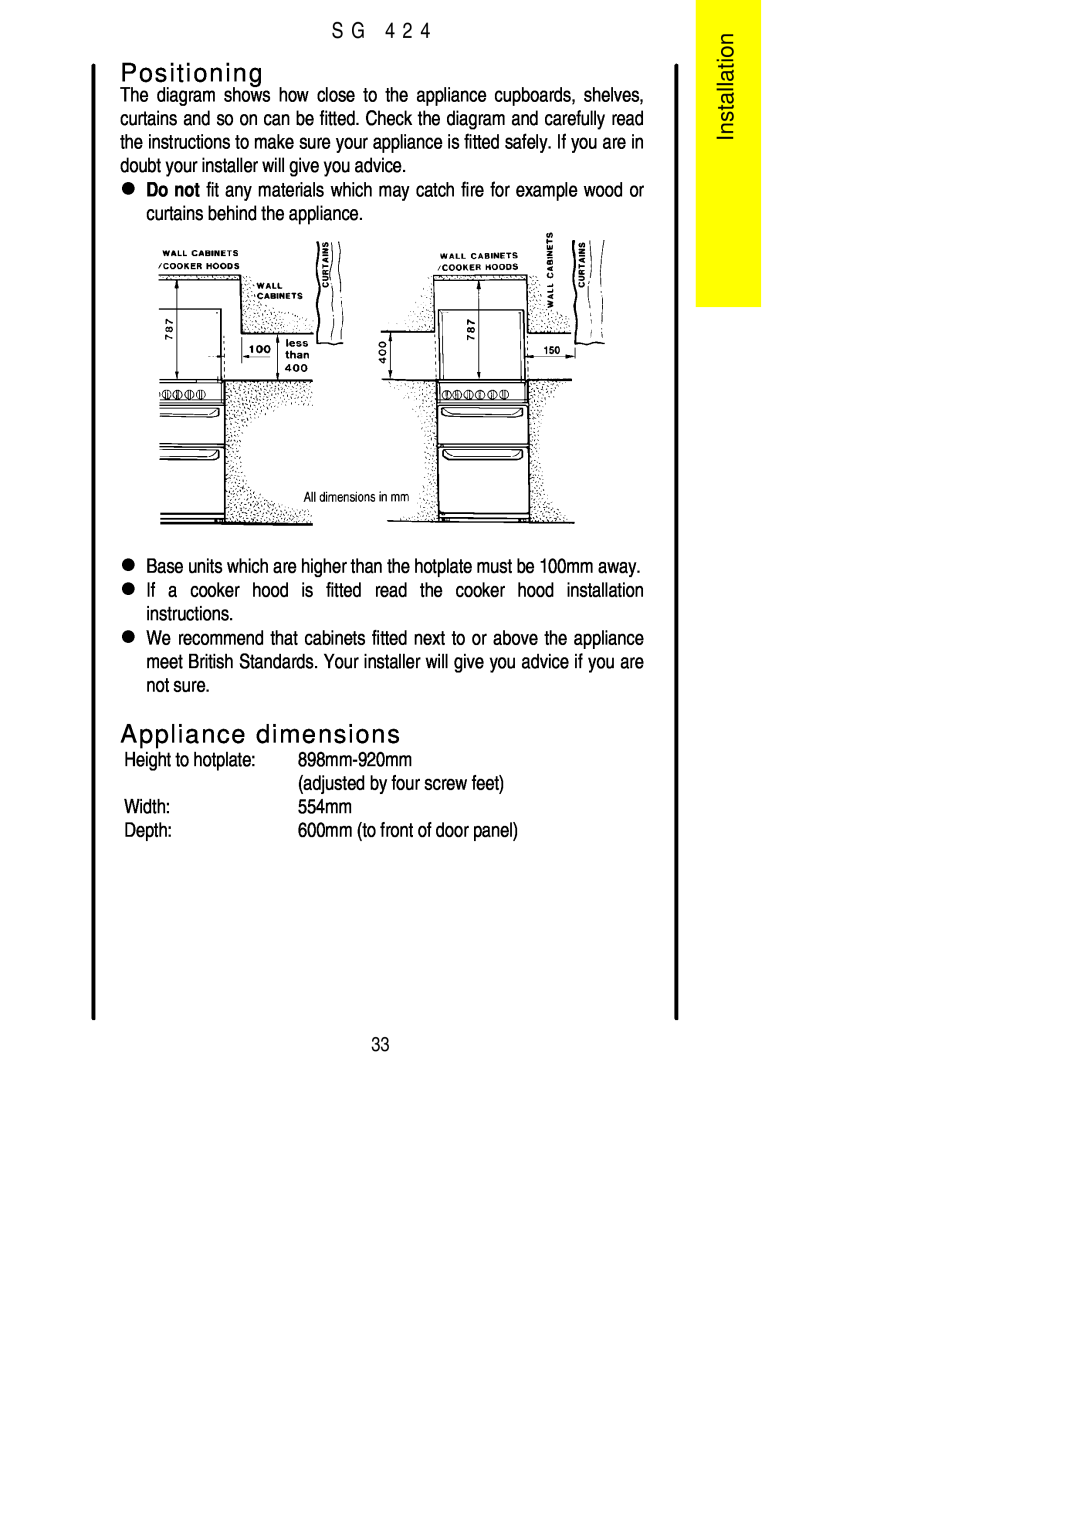 Electrolux SG 424 installation instructions Positioning, Appliance dimensions, Installation, S G 4 2 